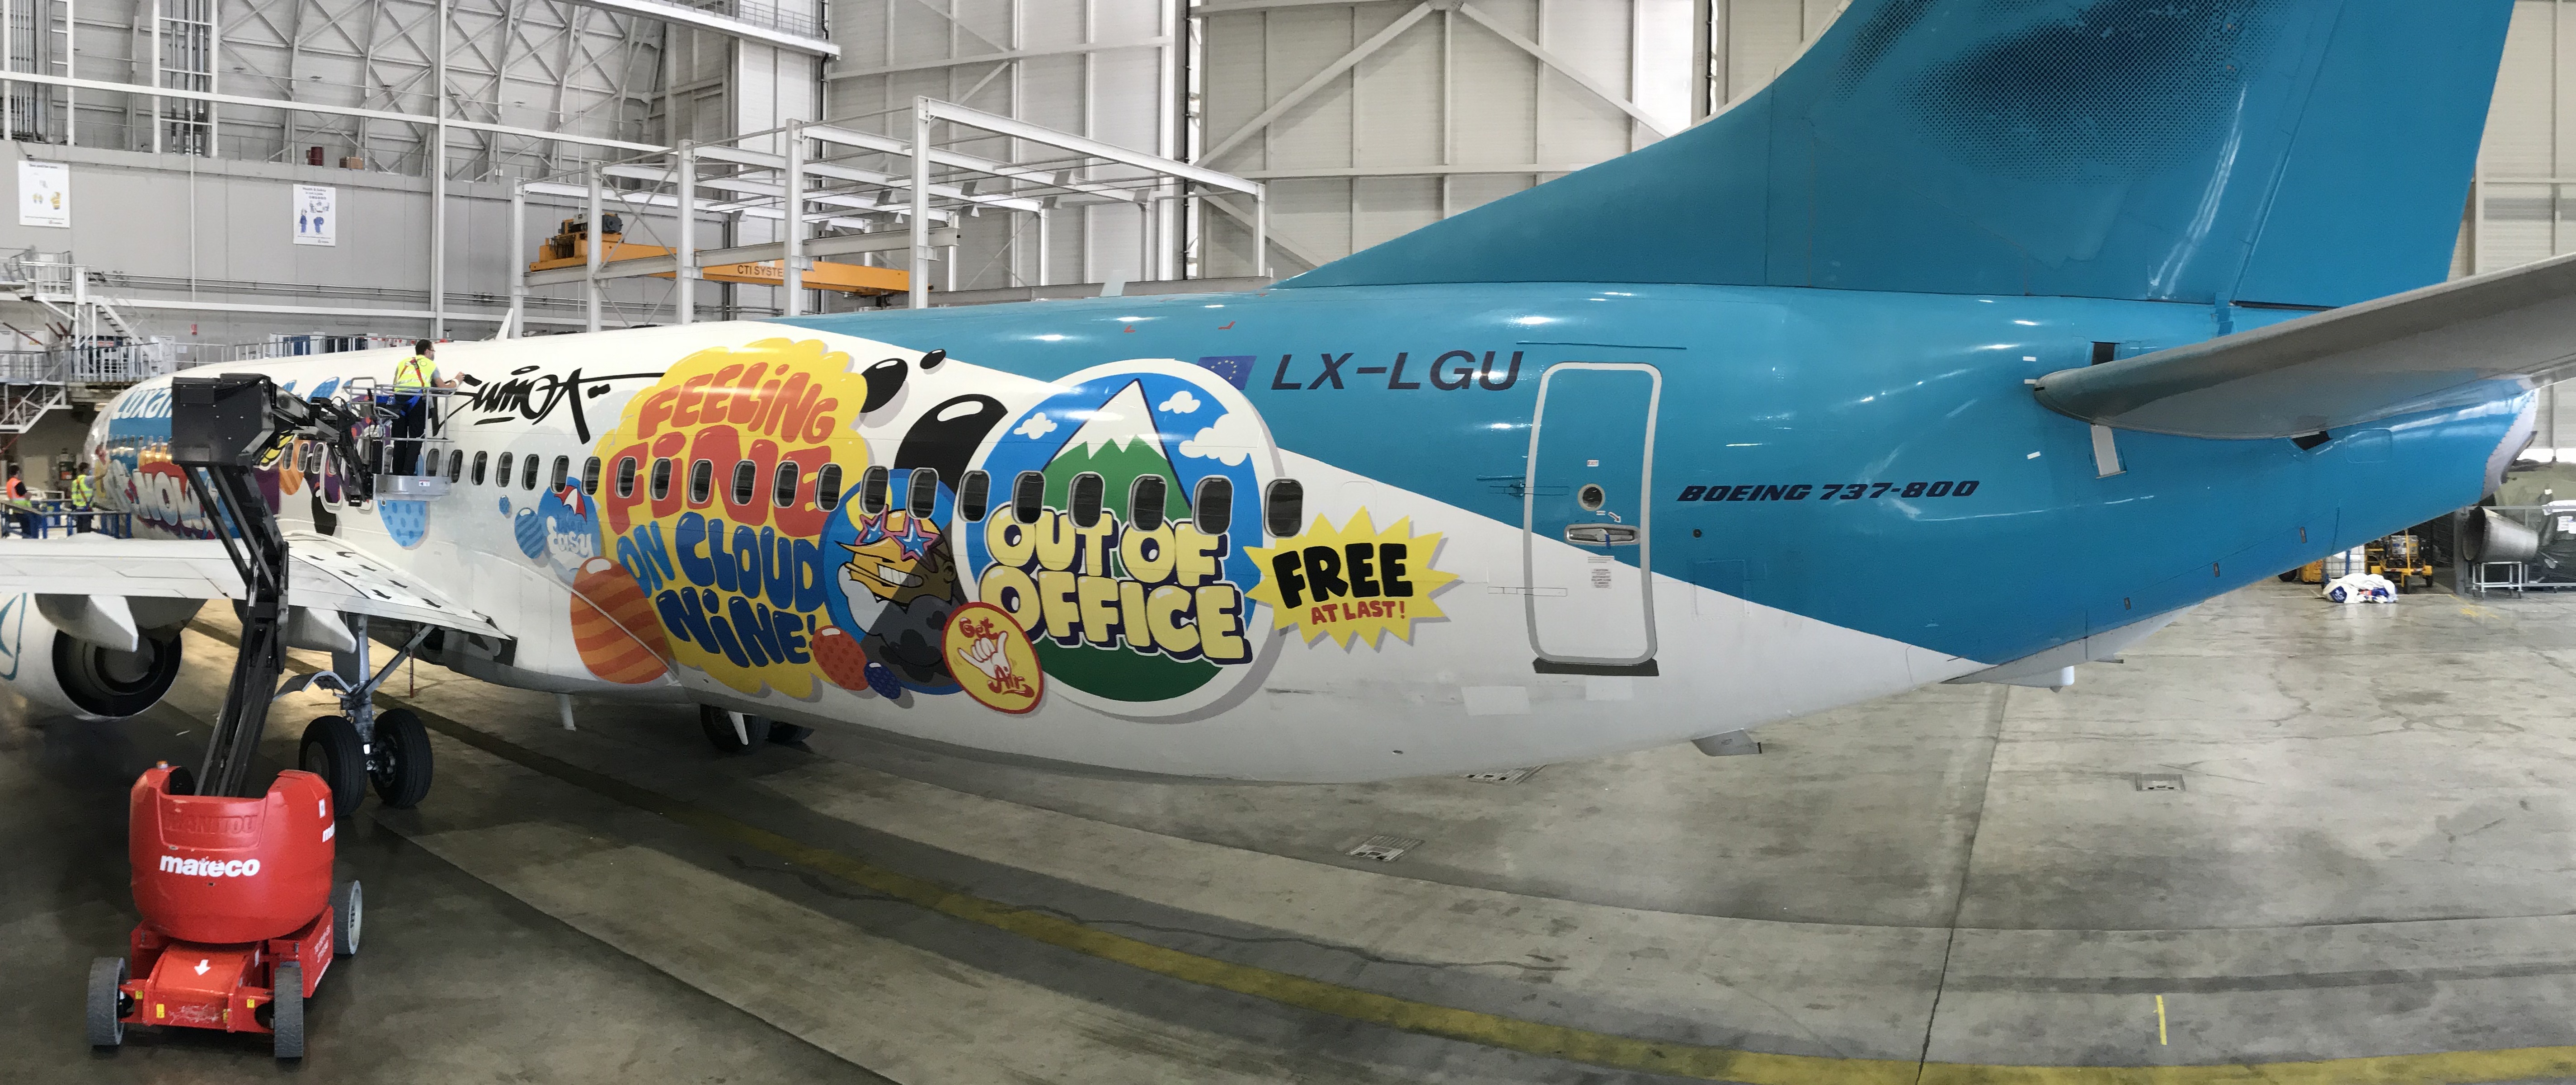 Aircraft livery SUMO Luxair aviation graphic film stickers